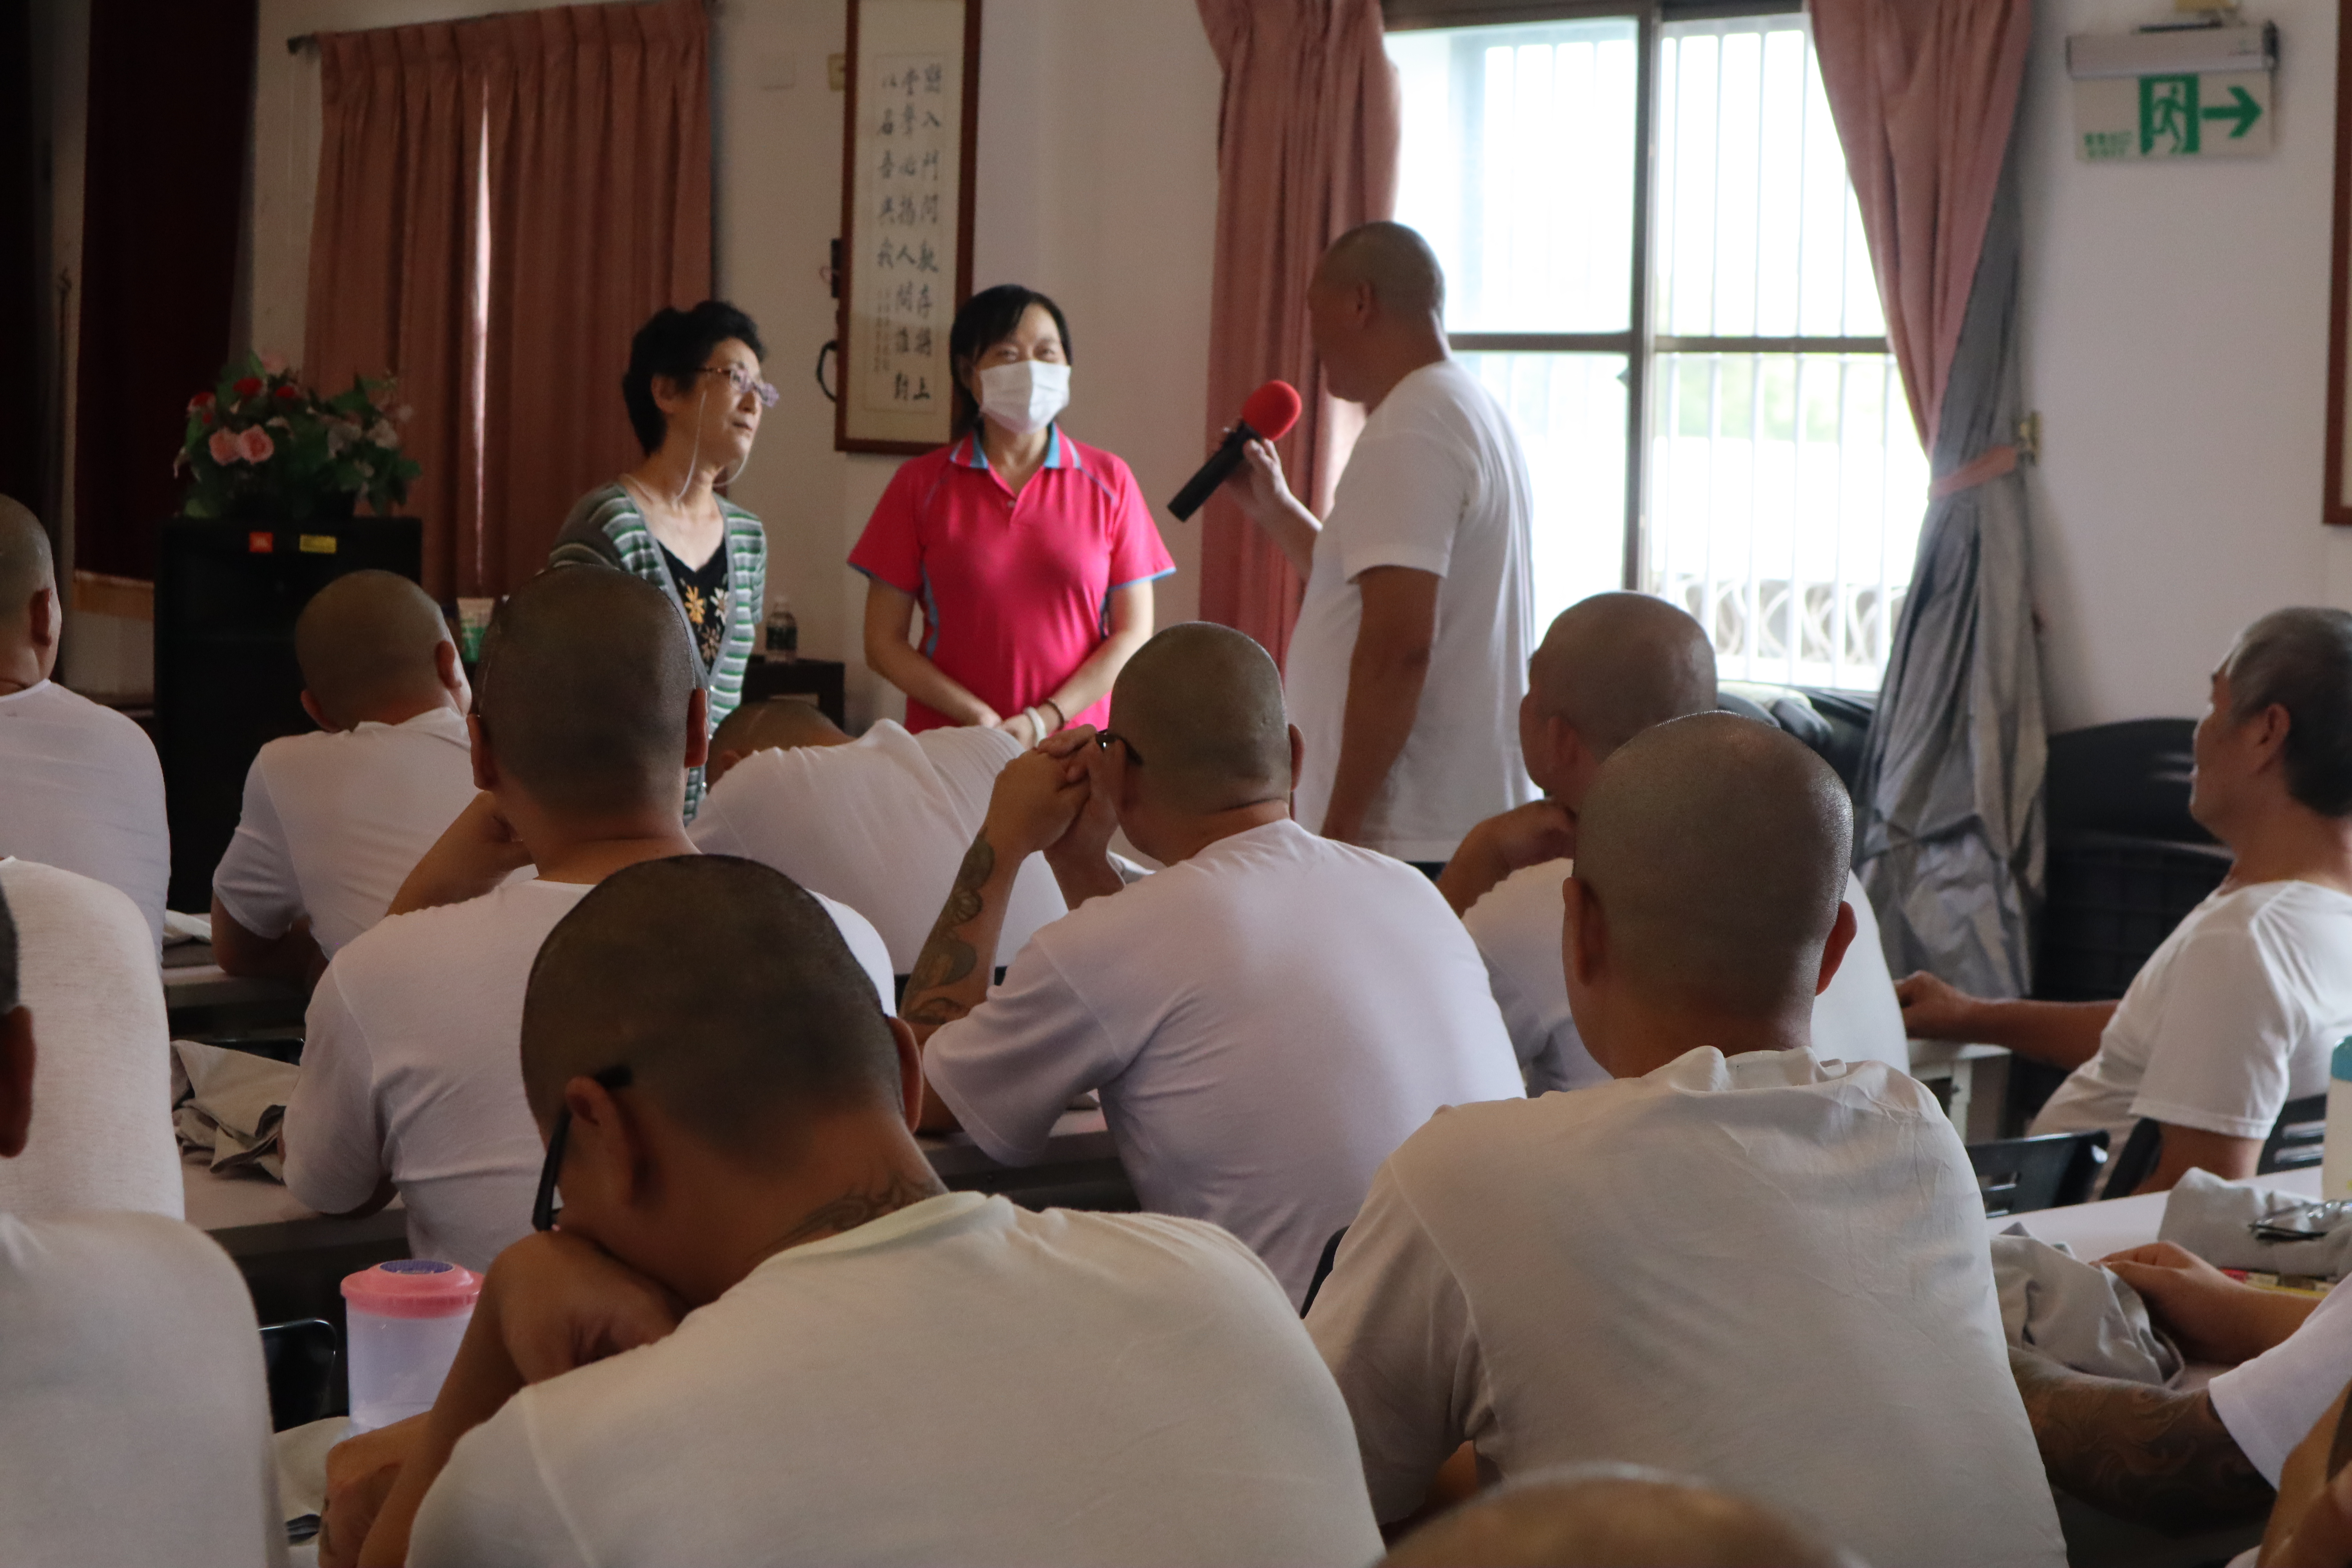 The lecturer and inmates talked about the effects of alcohol on people.